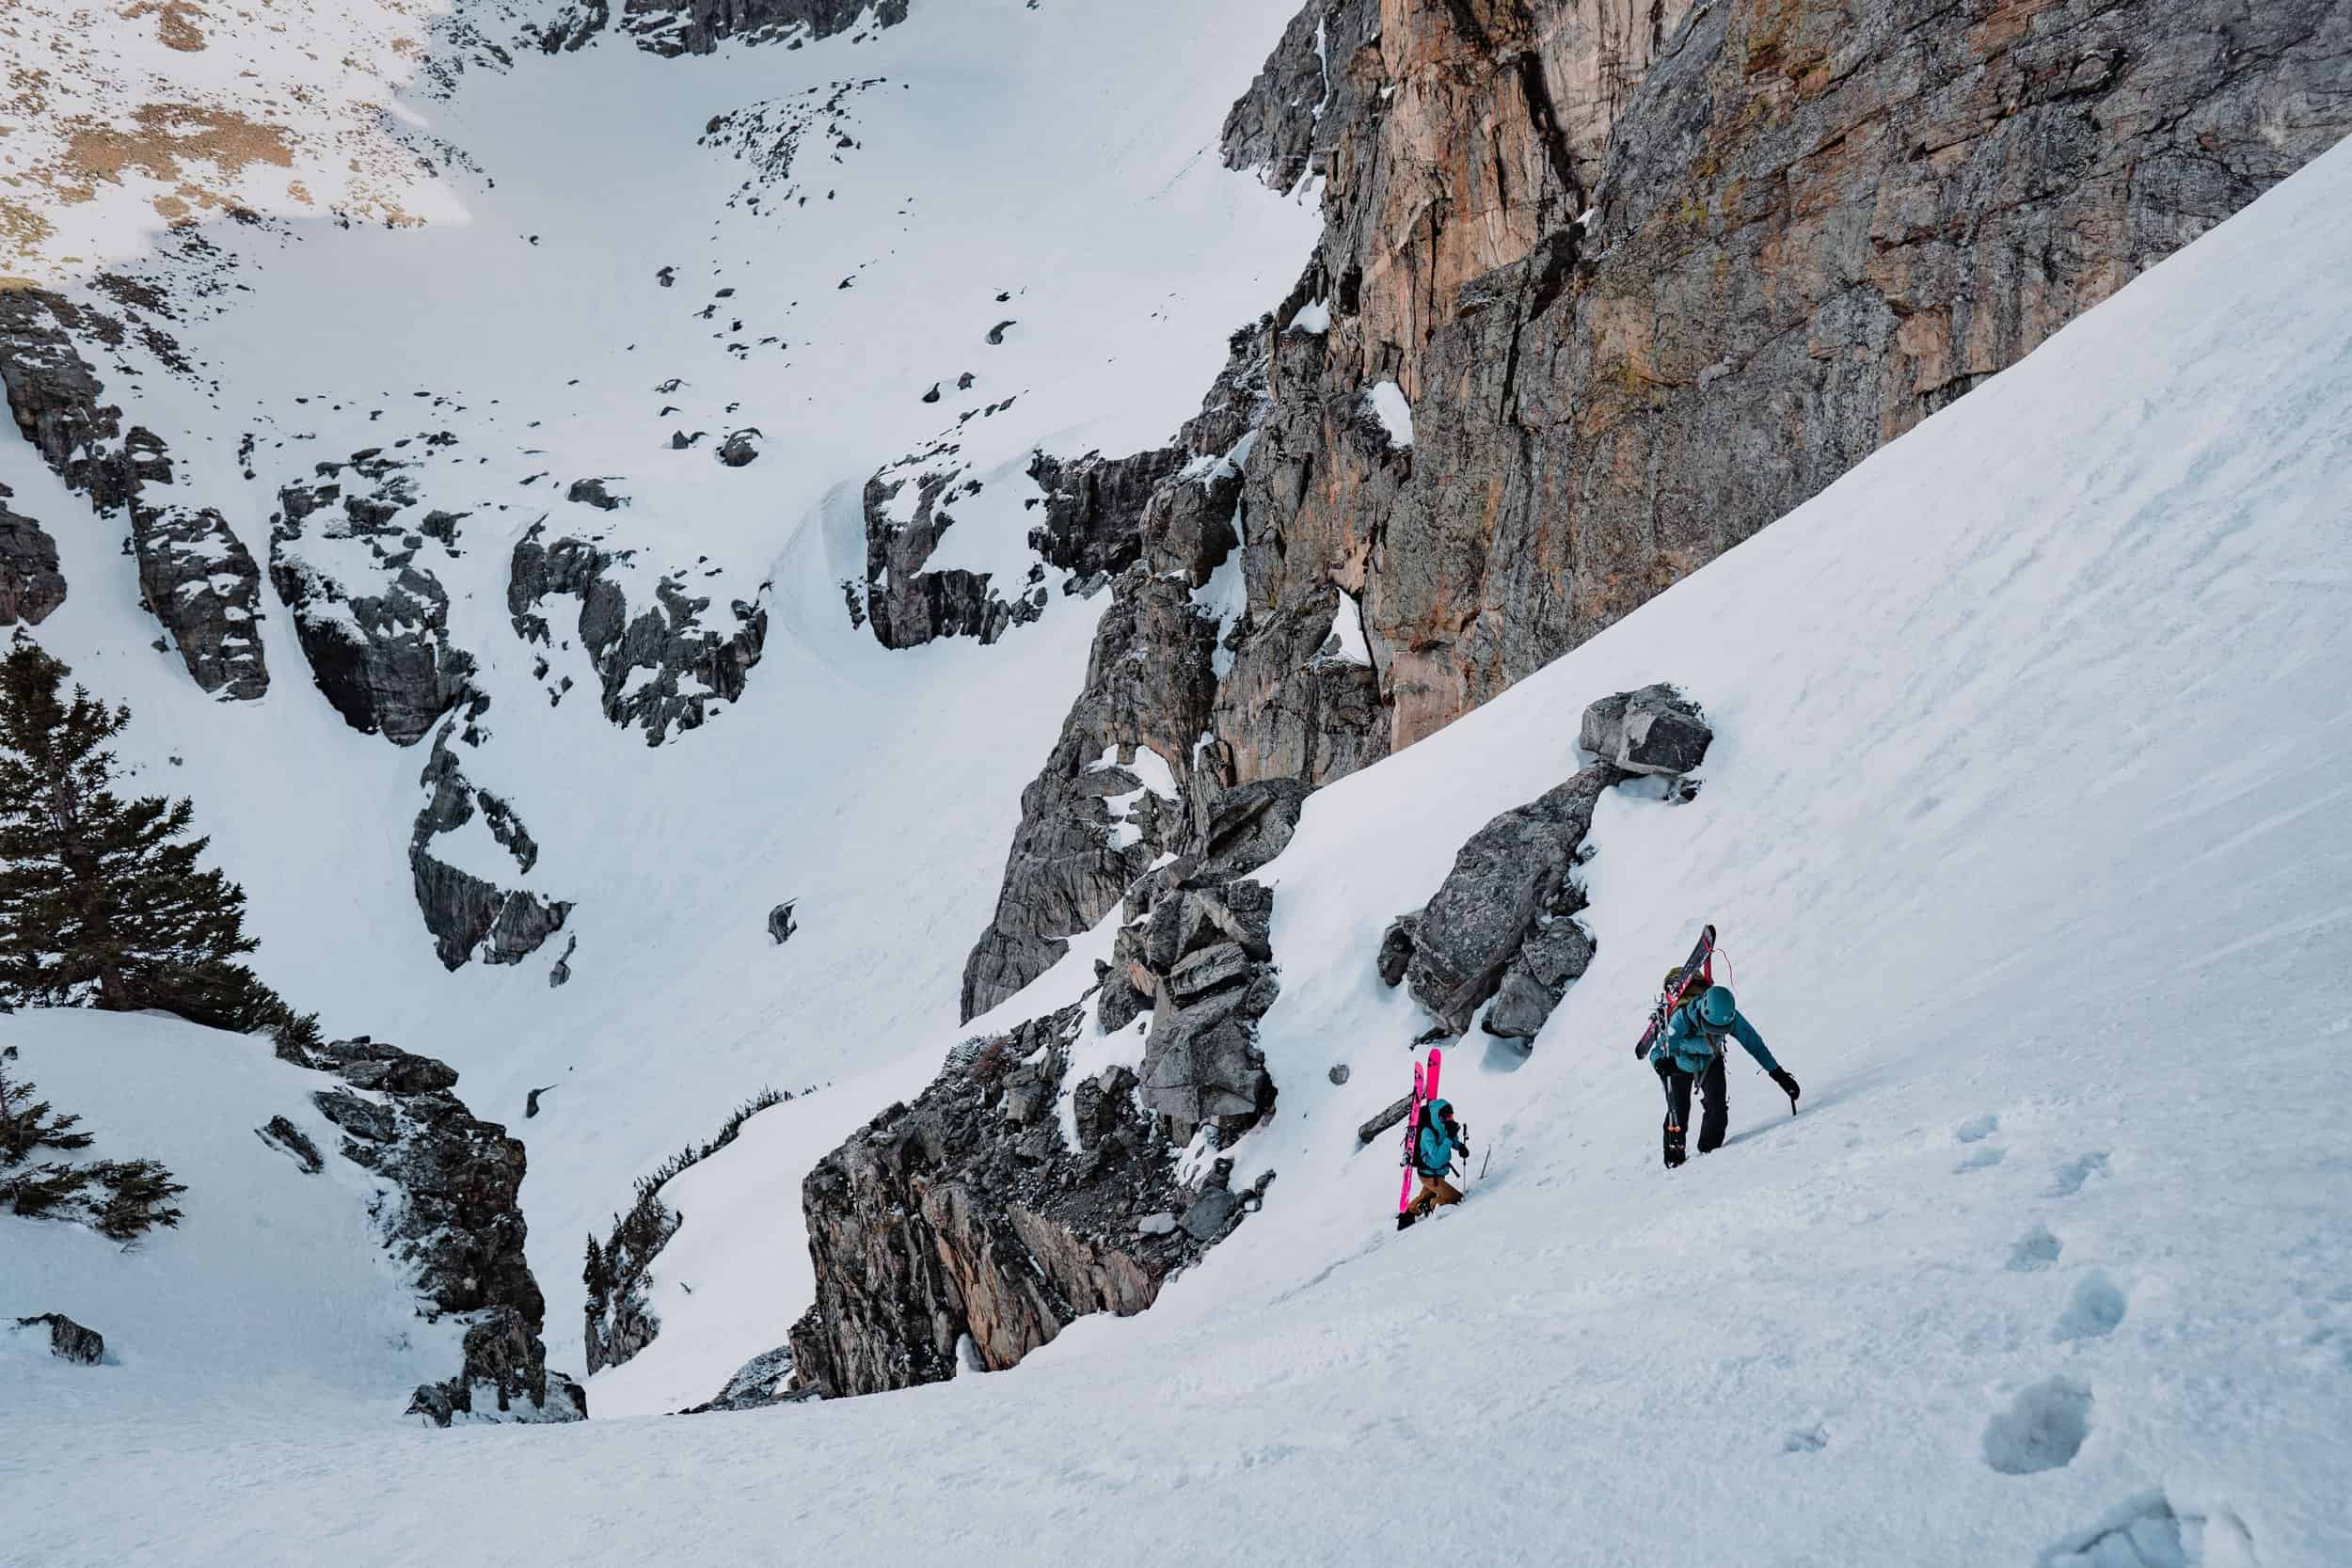 Photo by Bianca Germain of two skiers climbing up towards as peak.